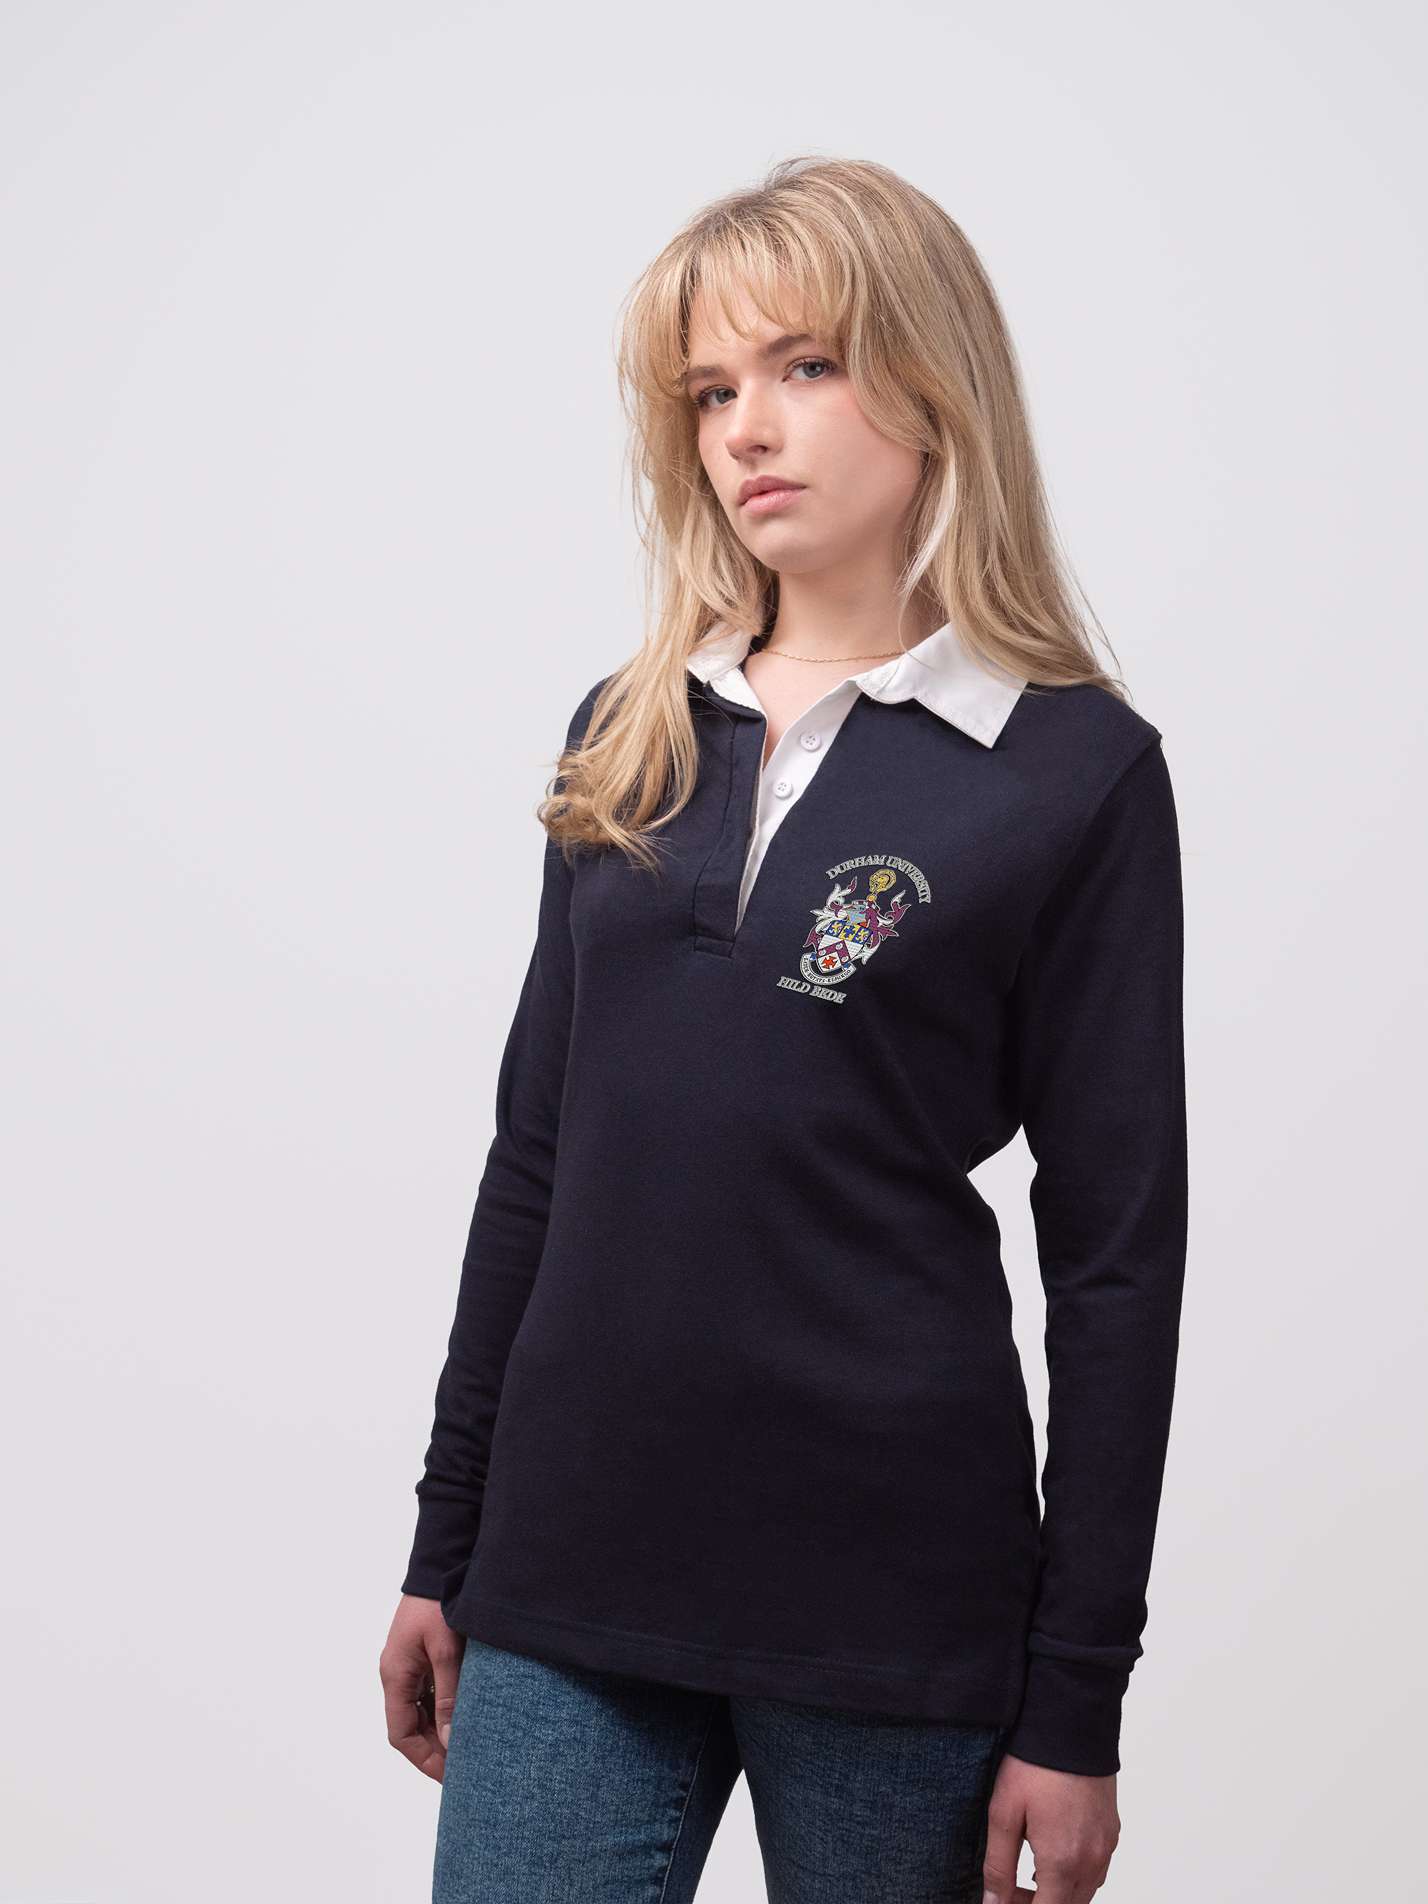 Student wearing a navy St Hild and St Bede College rugby shirt with embroidered crest